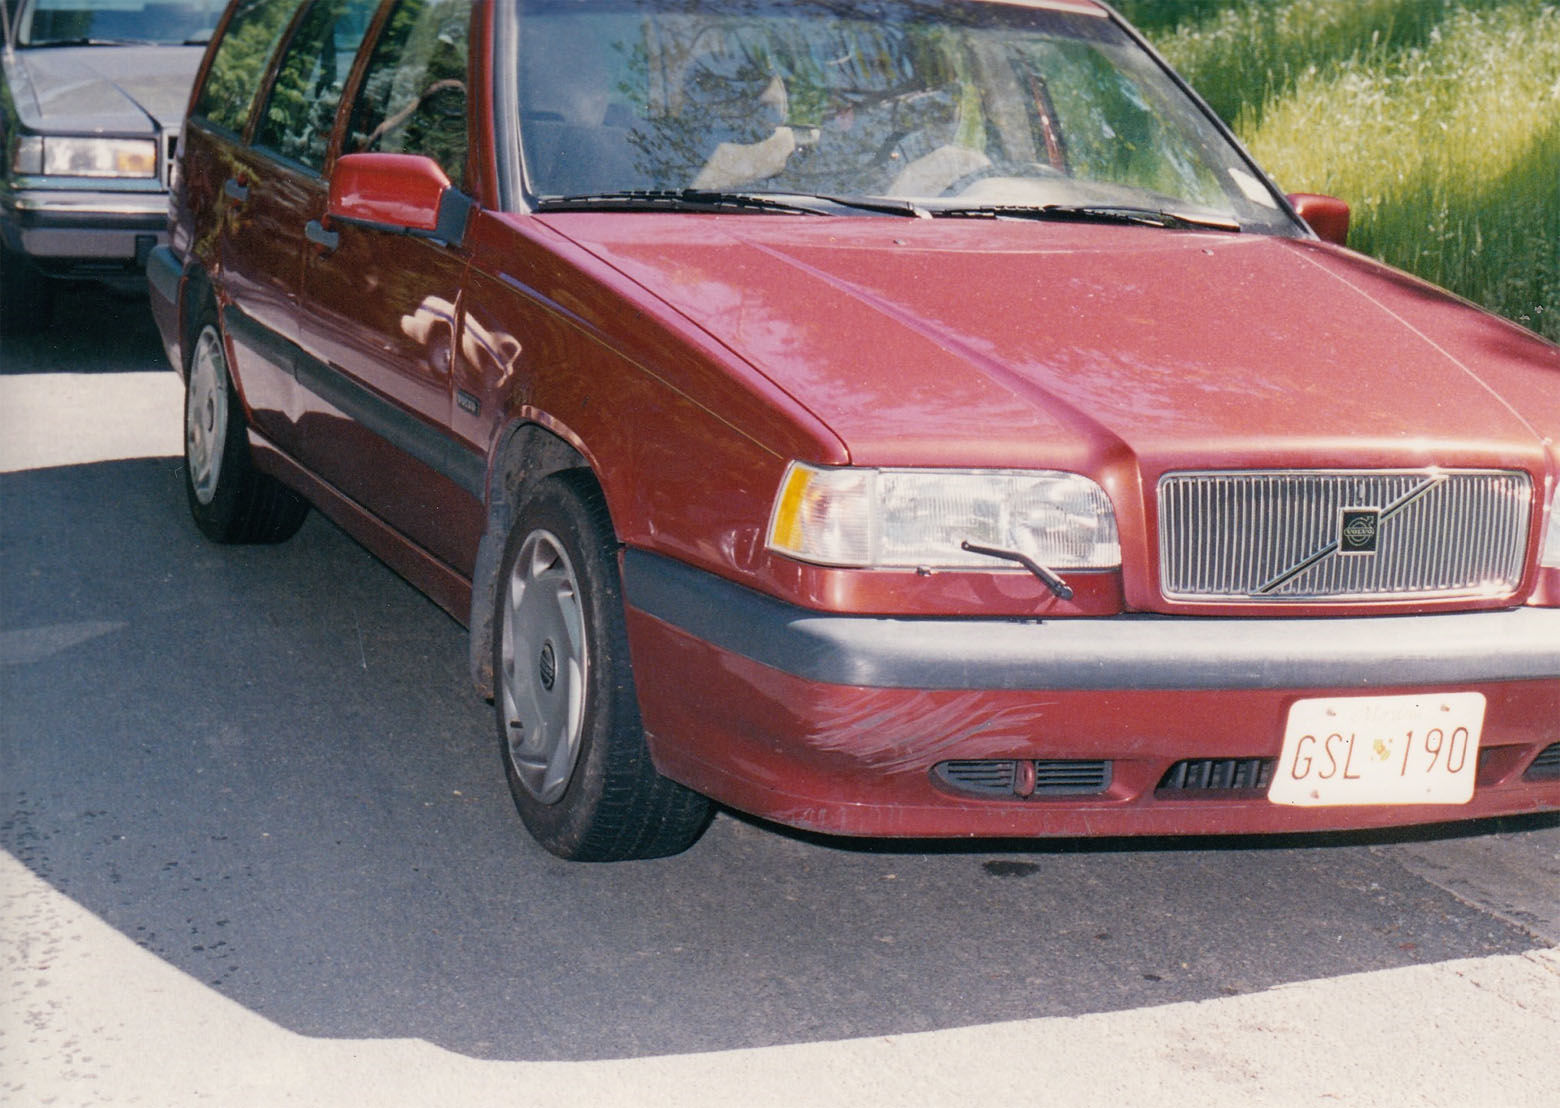 Alison Thresher's red Volvo, which was found about a mile away from her Bethesda apartment. (Courtesy Montgomery County police)